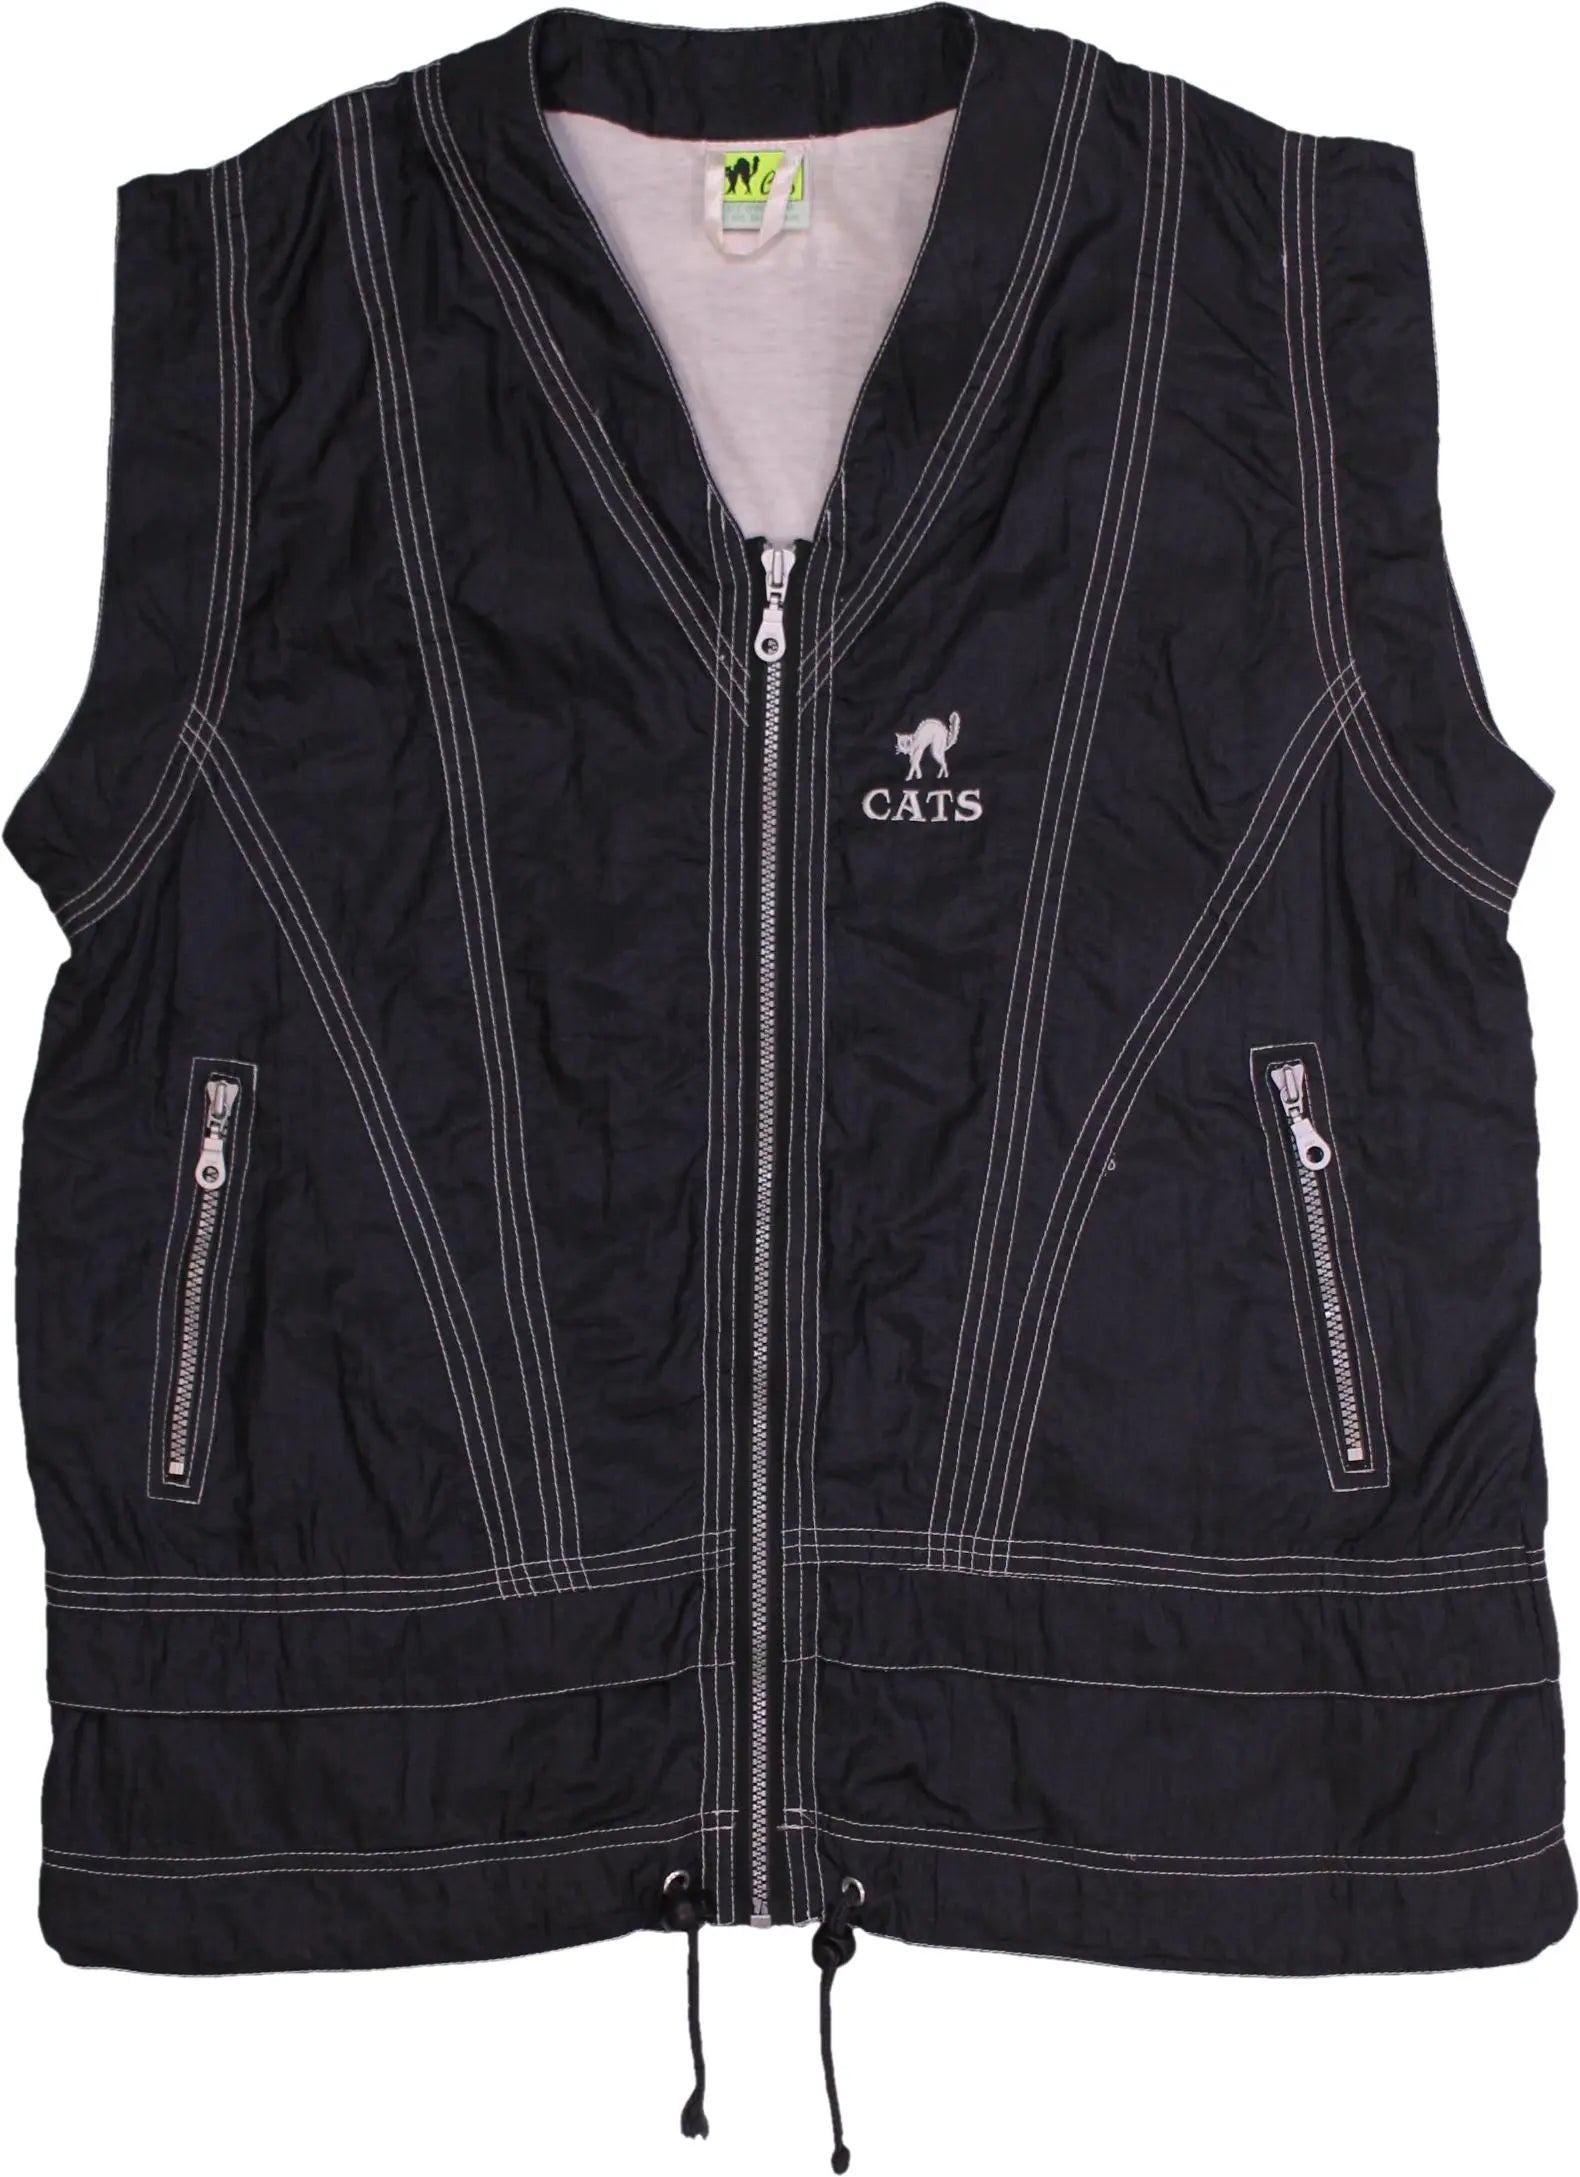 Cats Sportswear - 90s Sportswear Vest- ThriftTale.com - Vintage and second handclothing